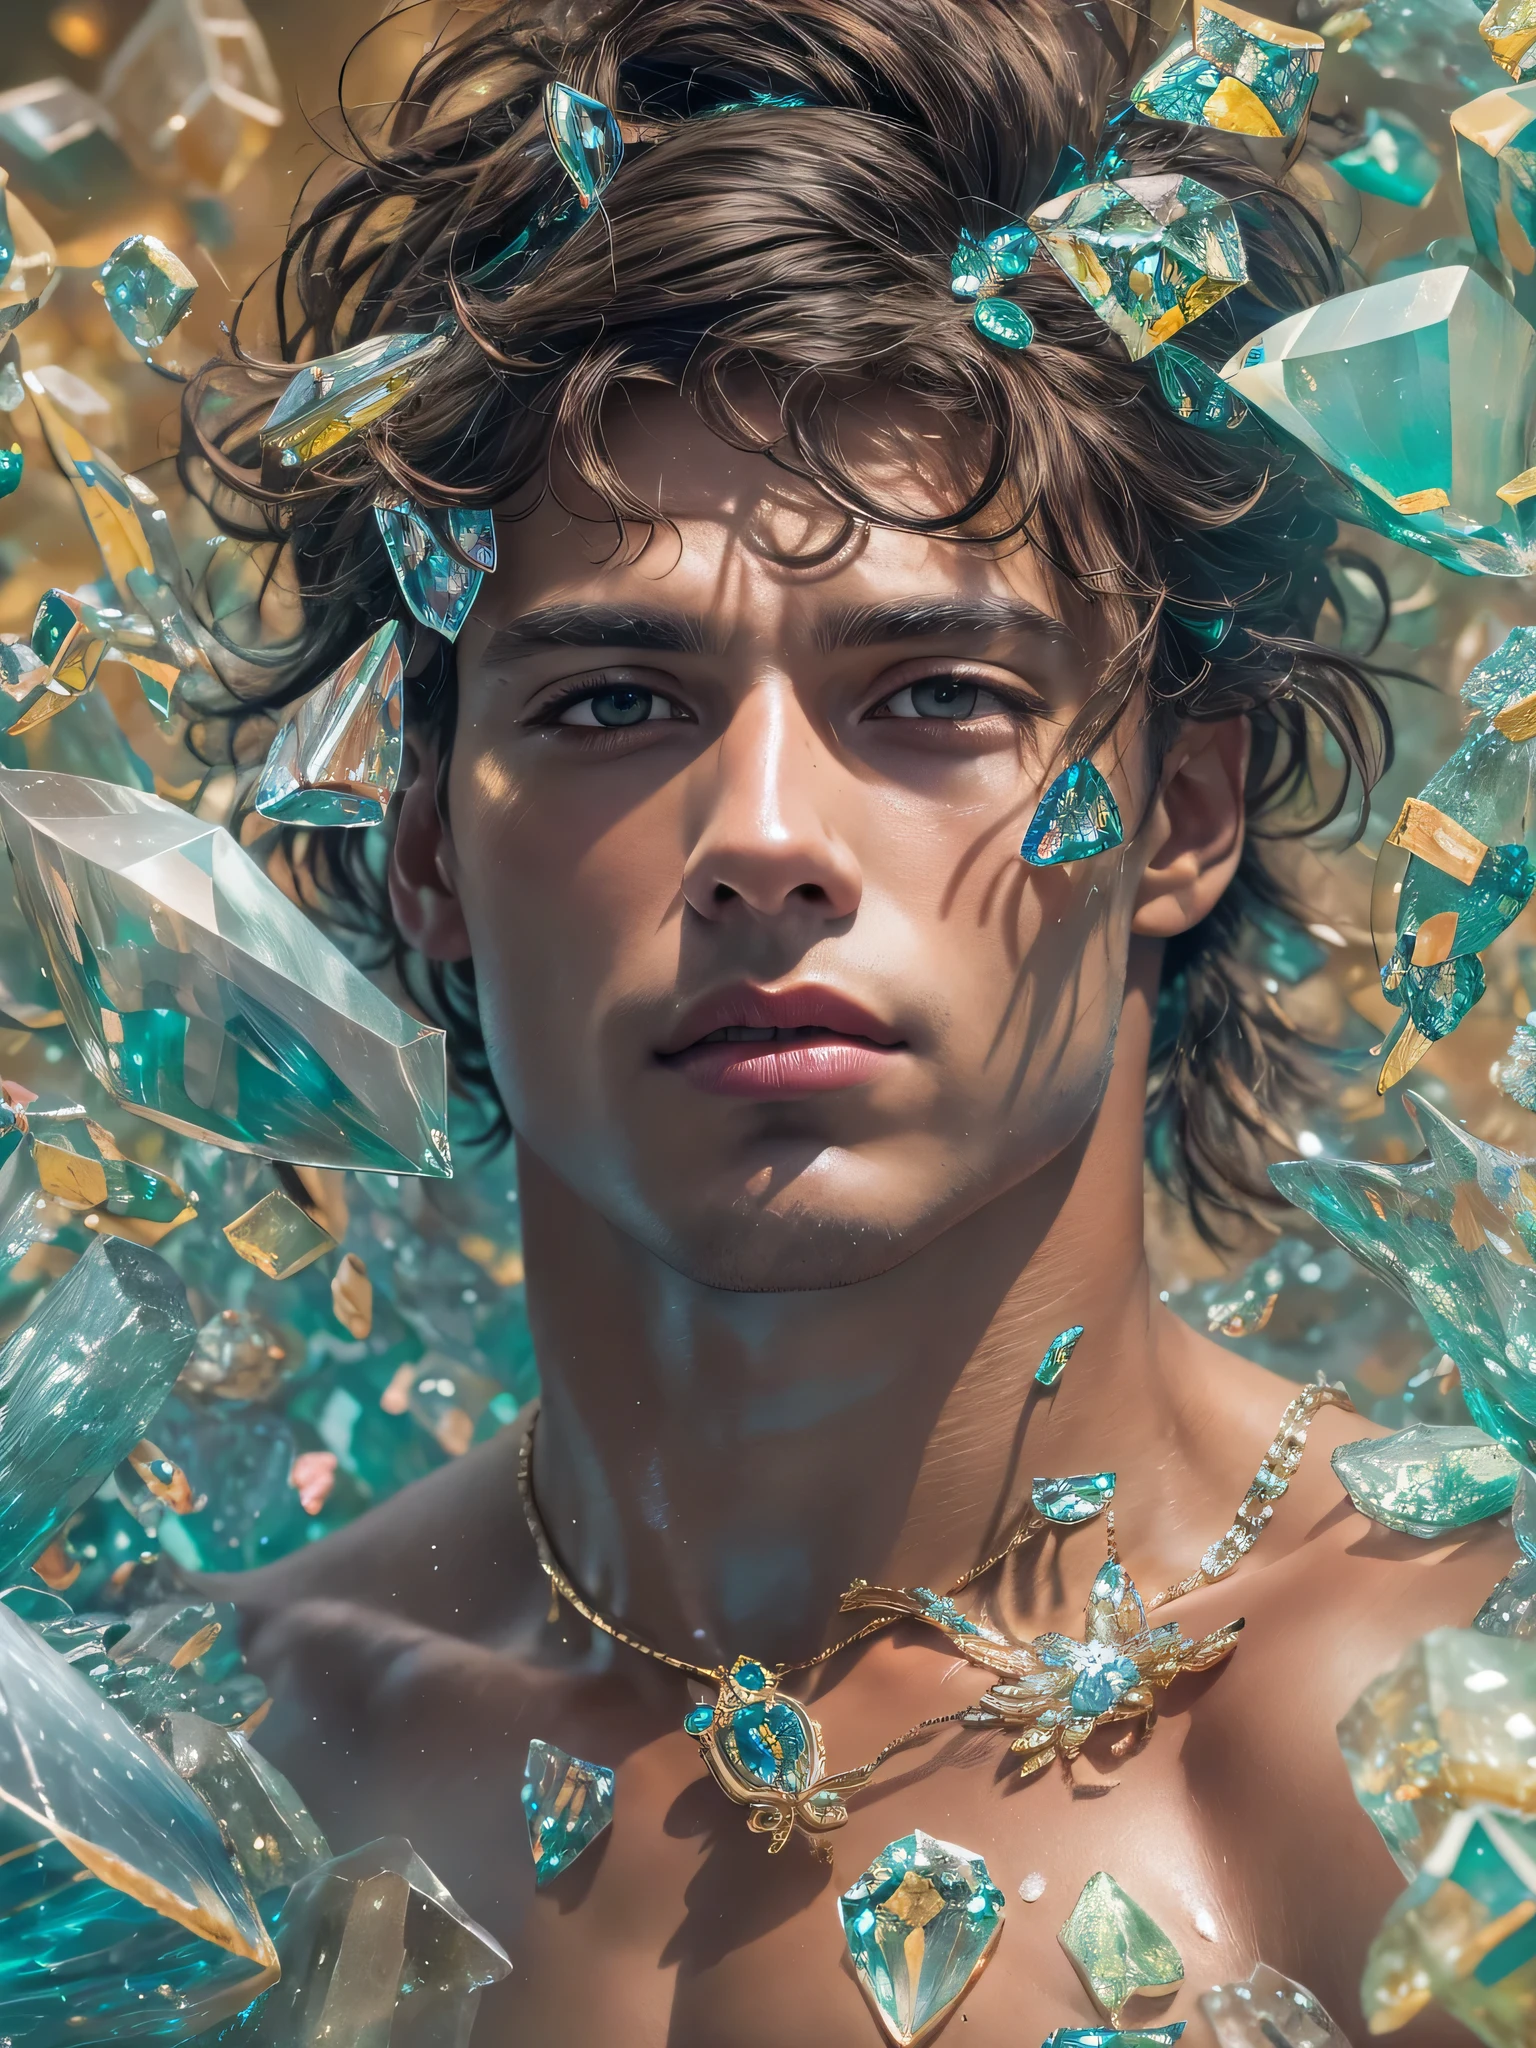 (photorealistic, masterpiece, best quality, highres, highly detailed), a young and handsome man posing nude surrounded by crystal, personification of crystal as a man, 18-year-old man, nude, penis, vibrant colors, realistic lighting, sparkling reflections, radiant and transparent skin, slim athletic physique, intense gaze, striking features, well-defined jawline, tousled hair, confident and relaxed posture, artistic composition, elegant and graceful pose, captivating and alluring expression, the man's body covered with delicate and intricate crystals, creating a mesmerizing and ethereal effect, immaculate attention to detail, flawless rendering of textures, harmonious blend of realism and fantasy, incredible depth and dimension, attention-grabbing contrast between the smoothness of the man's skin and the texture of the crystals, seamless integration of the human form with the crystal surroundings, evoking a sense of grace, beauty, and mystery, powerful symbolism of purity and strength embodied by the crystal elements, expert use of shadows and highlights to enhance the three-dimensional quality of the image, masterful use of color to create a dreamlike atmosphere, refined and subtle nuances of light and shade, creating a visually stunning and emotionally impactful scene, exquisite craftsmanship and skillful execution, capturing the essence of both the human form and the ethereal beauty of crystals, creating an unforgettable and awe-inspiring visual experience.